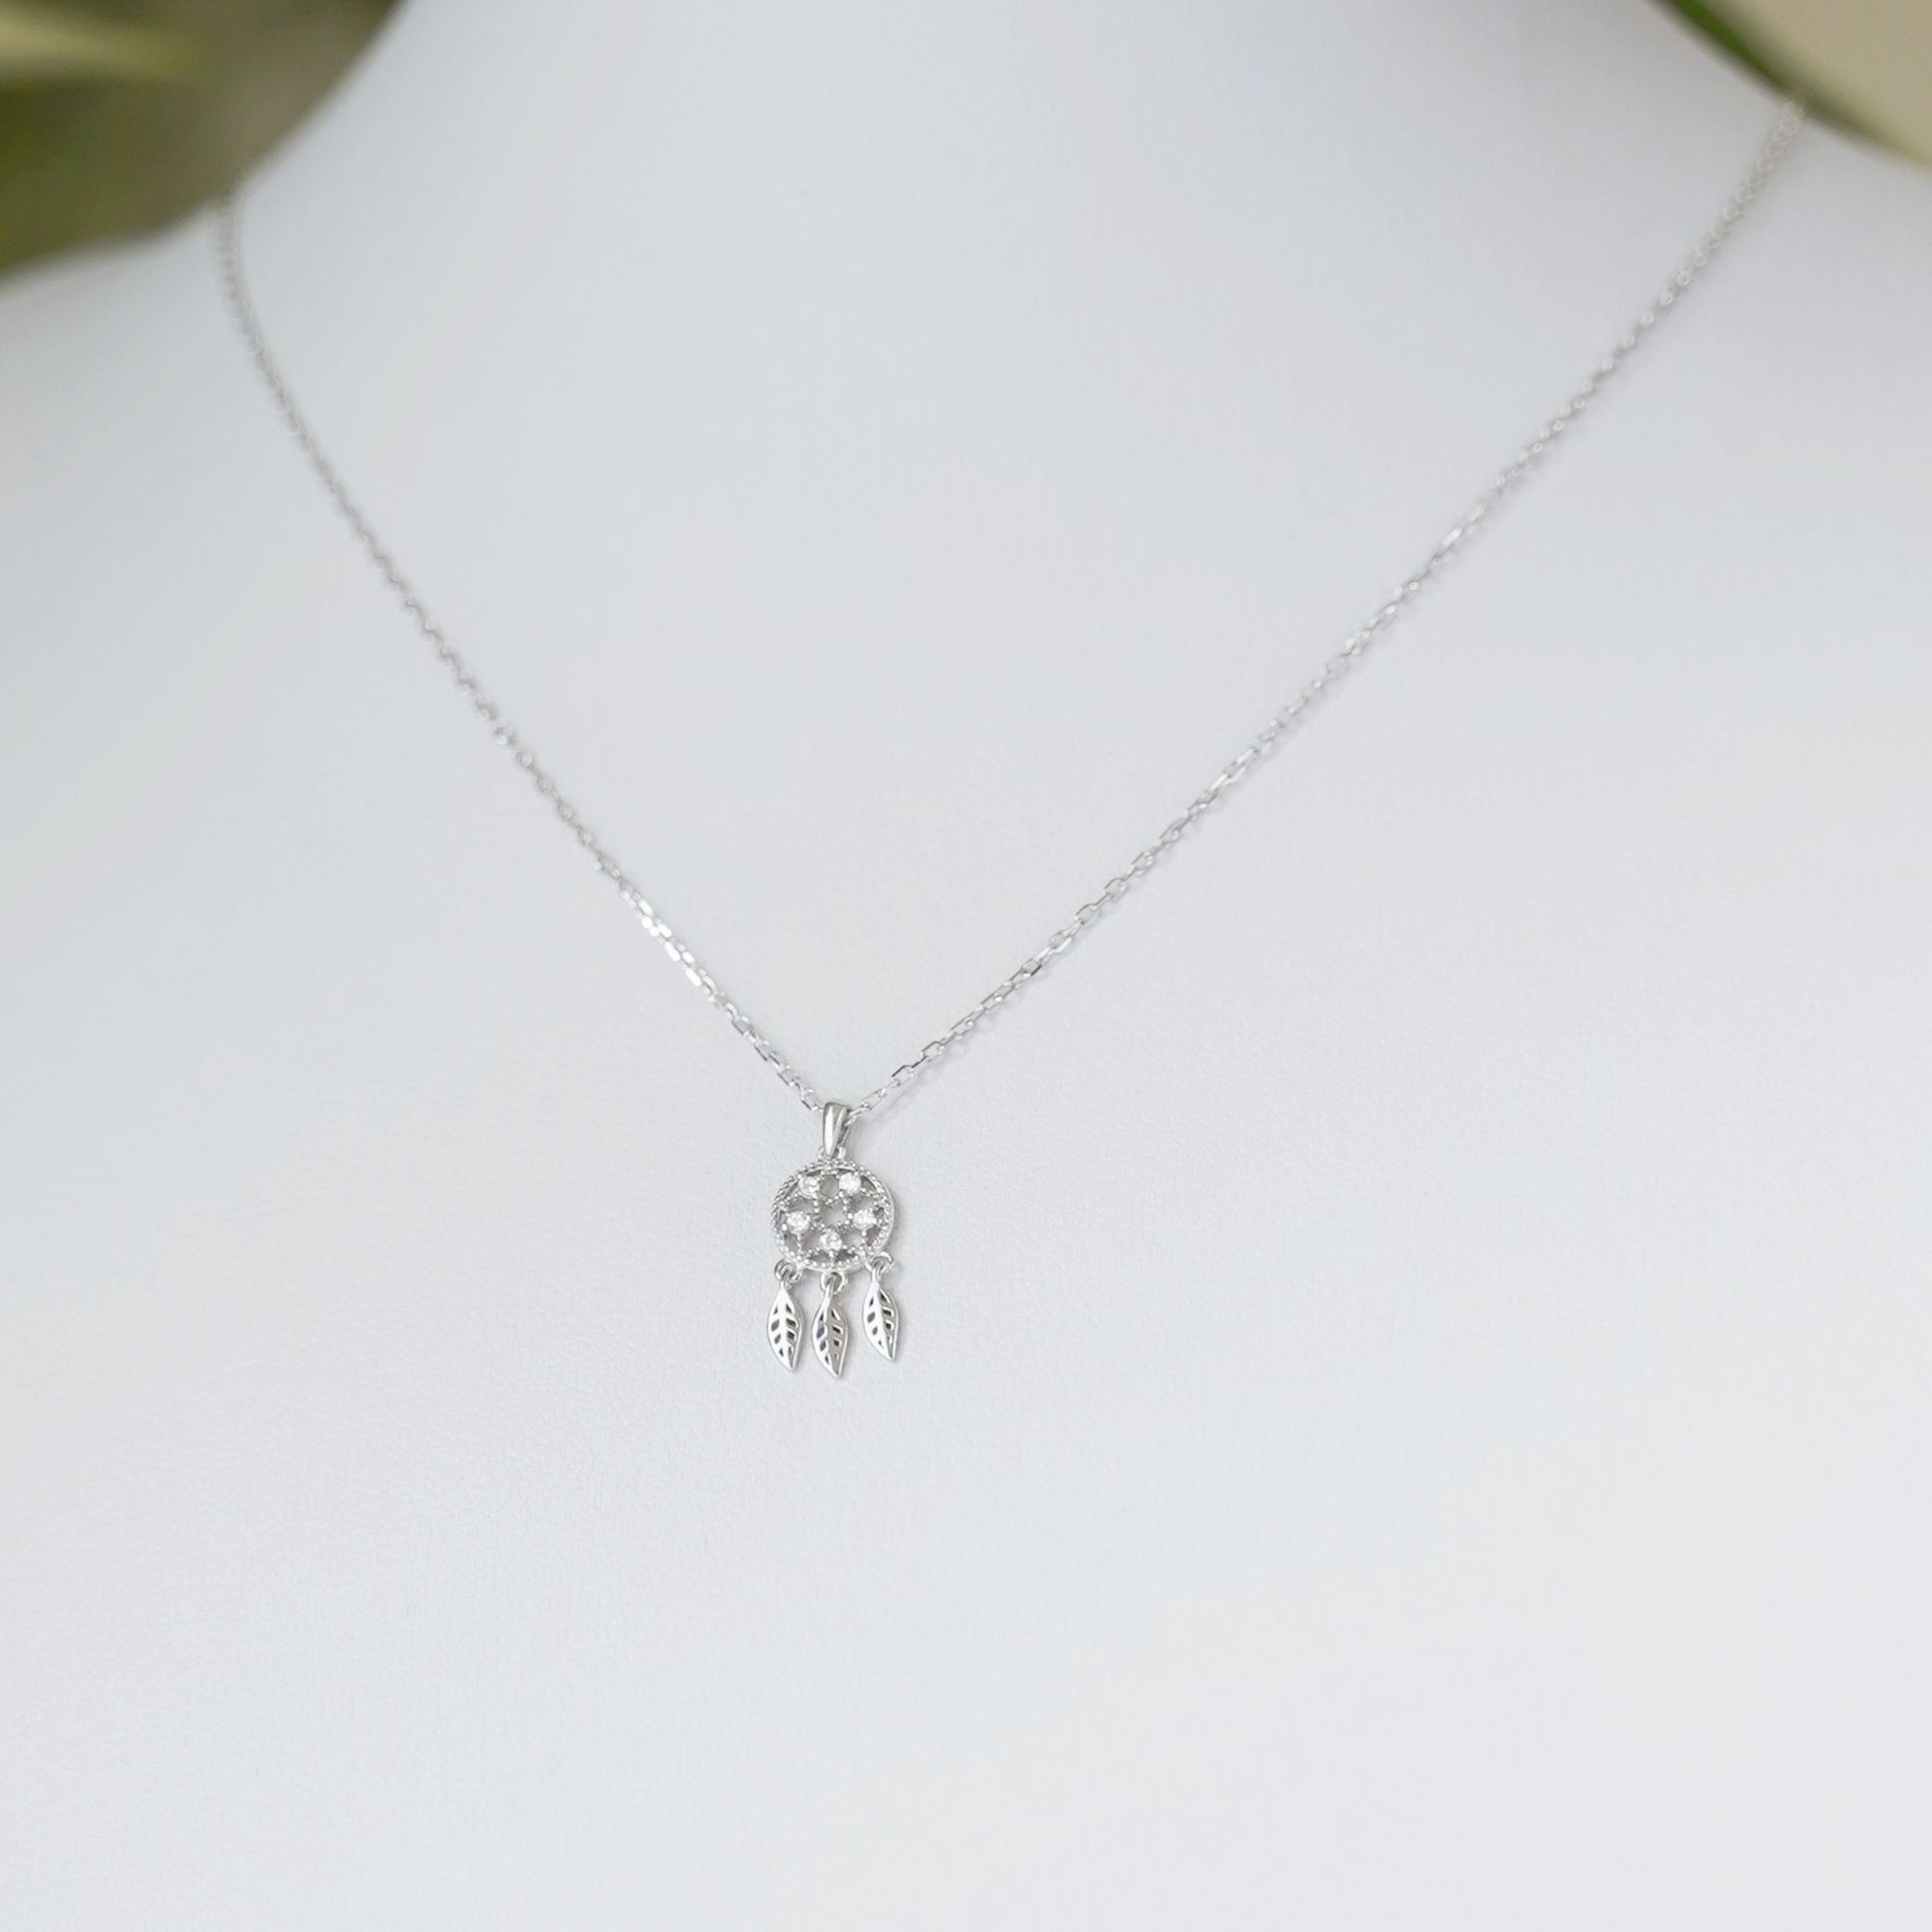 Sterling Silver Dreamcatcher Necklace With Crystal CZ Protection Jewellery - sugarkittenlondon